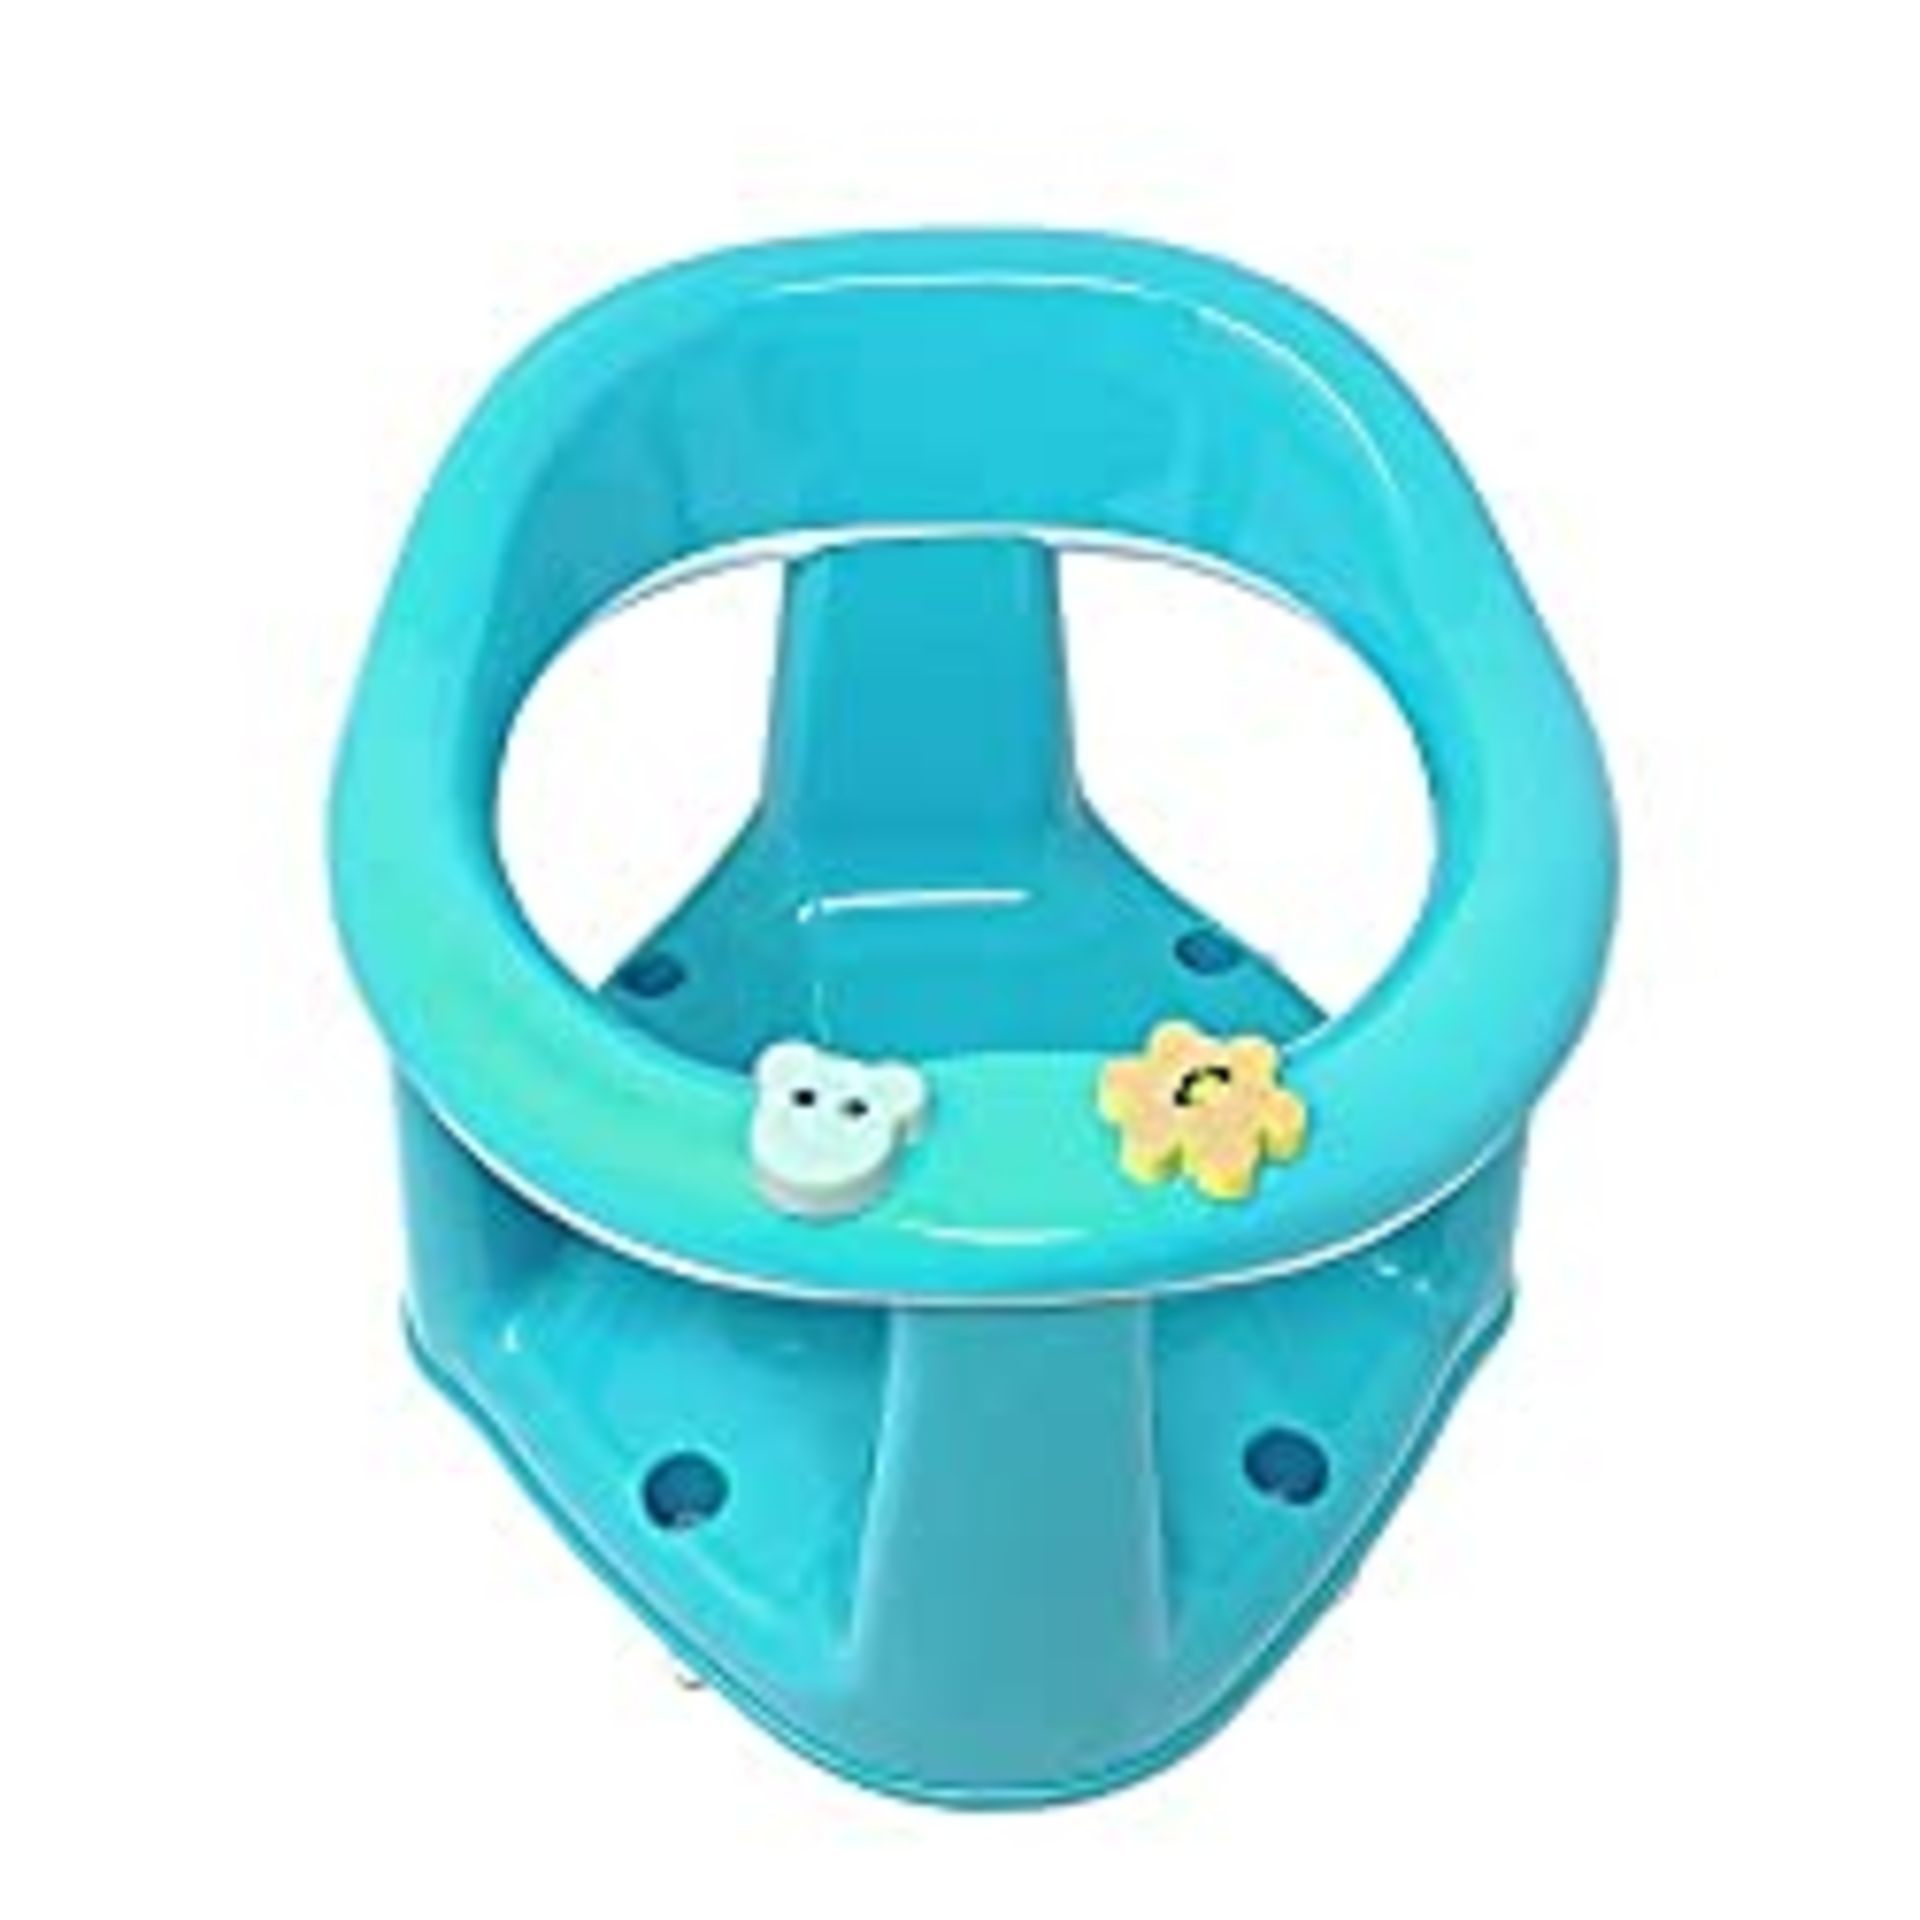 RRP £19.99 3 in 1 Ergonomic Shaped Baby Infant Toddler Child Bath